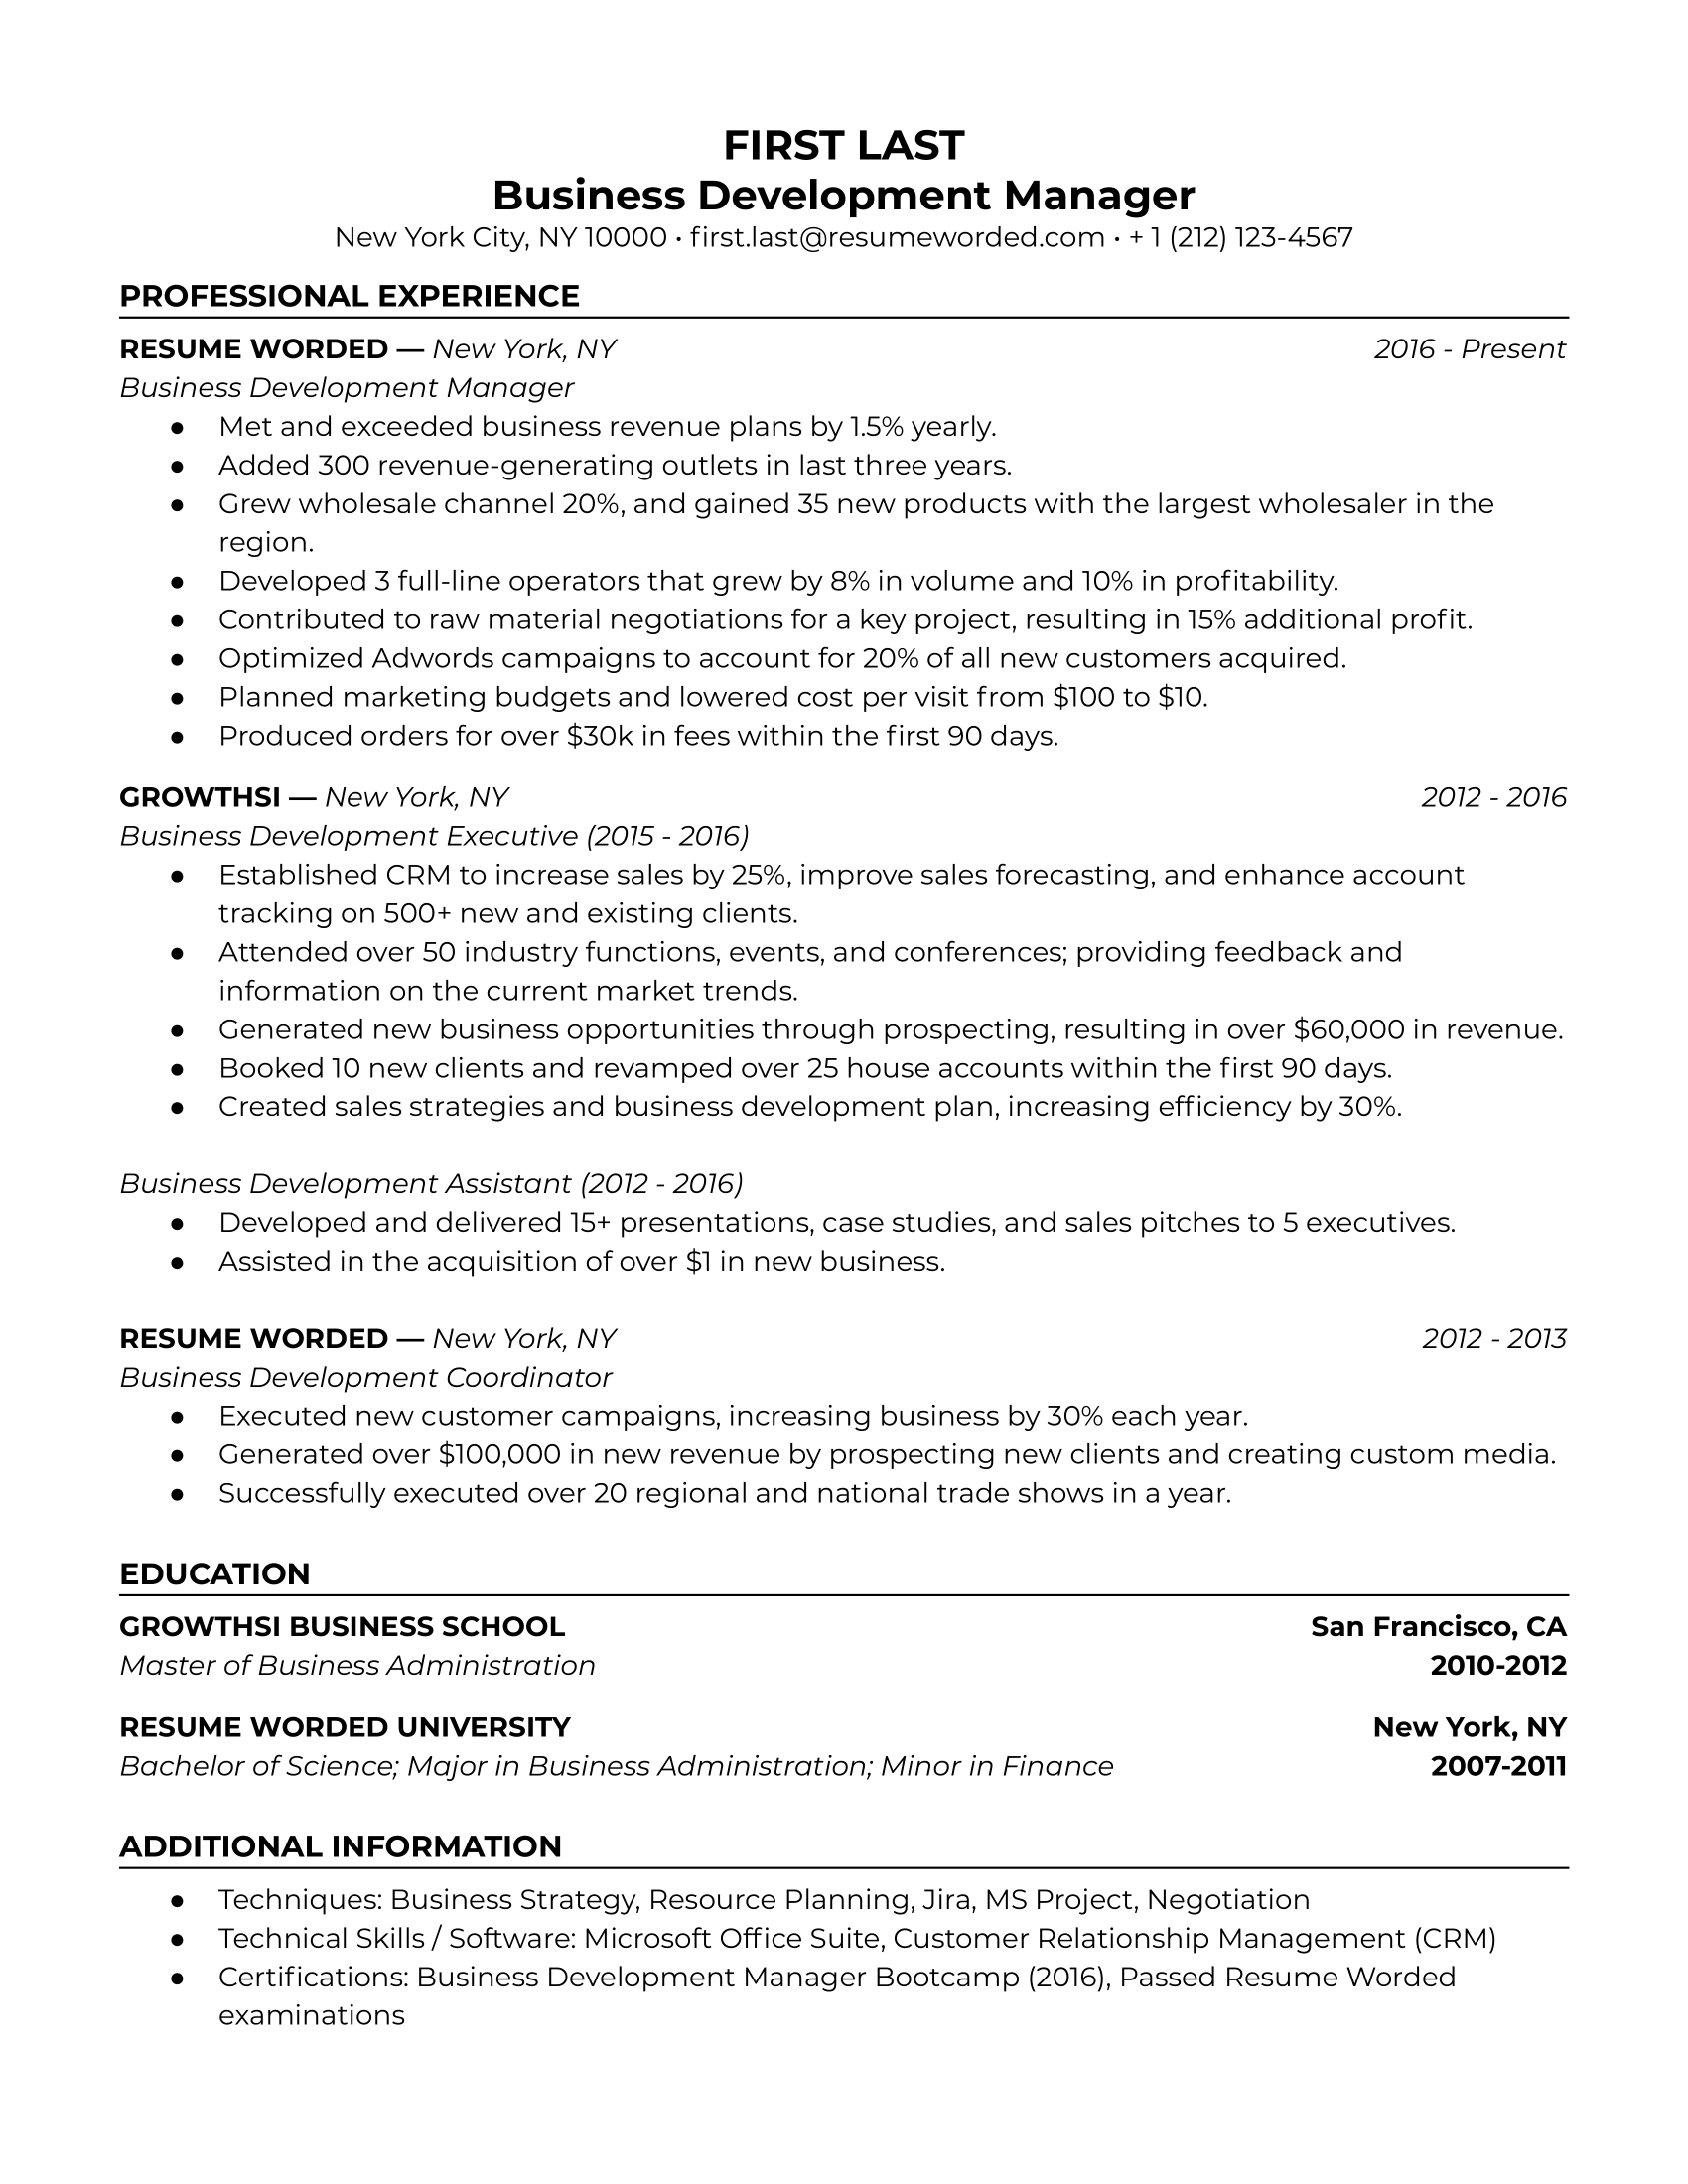 Business Development Manager Resume Template + Example